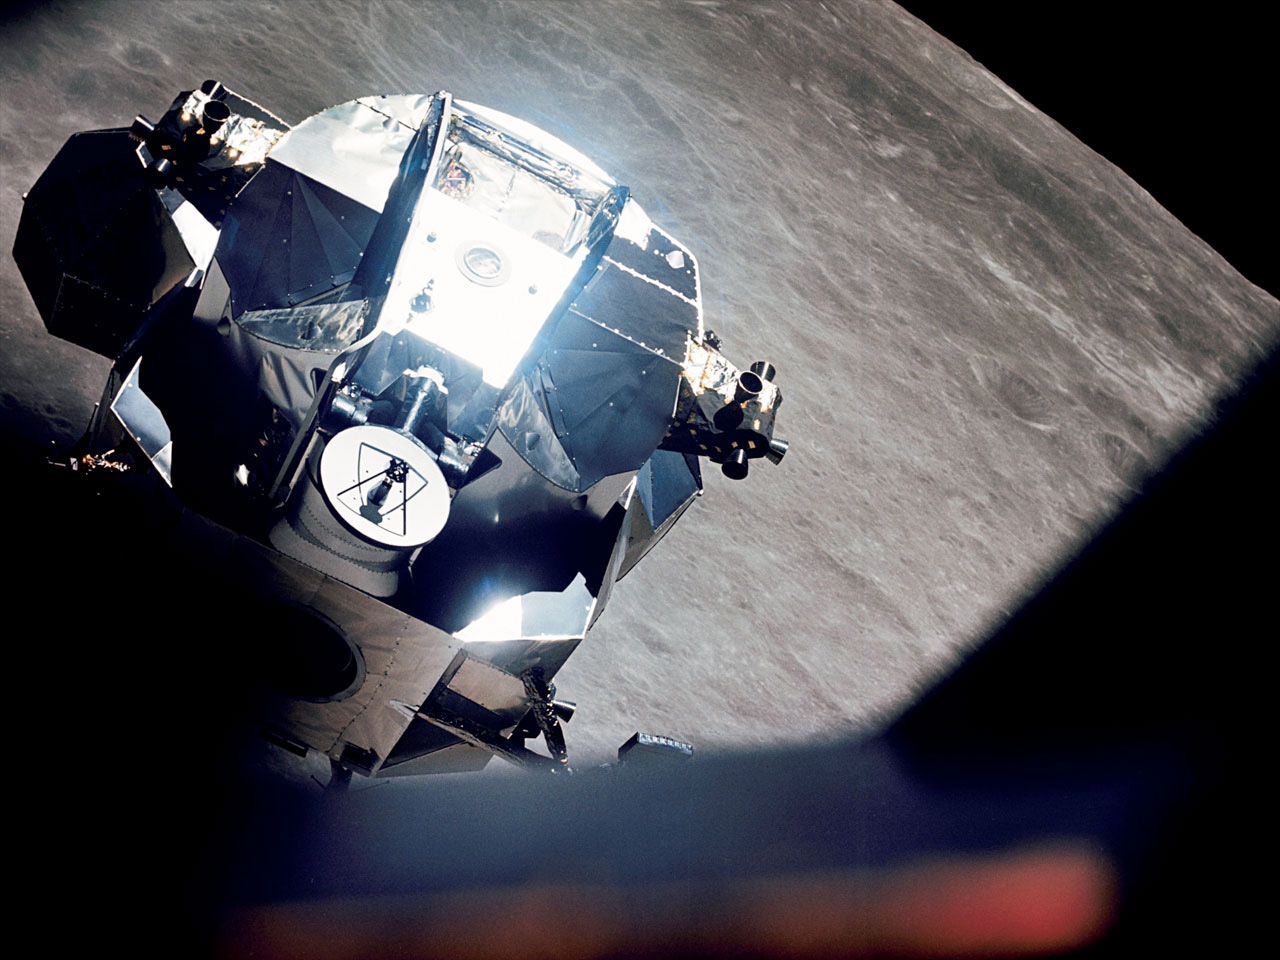 Apollo 11 Lunar Module ascent stage seen from Command Module Photo Print 